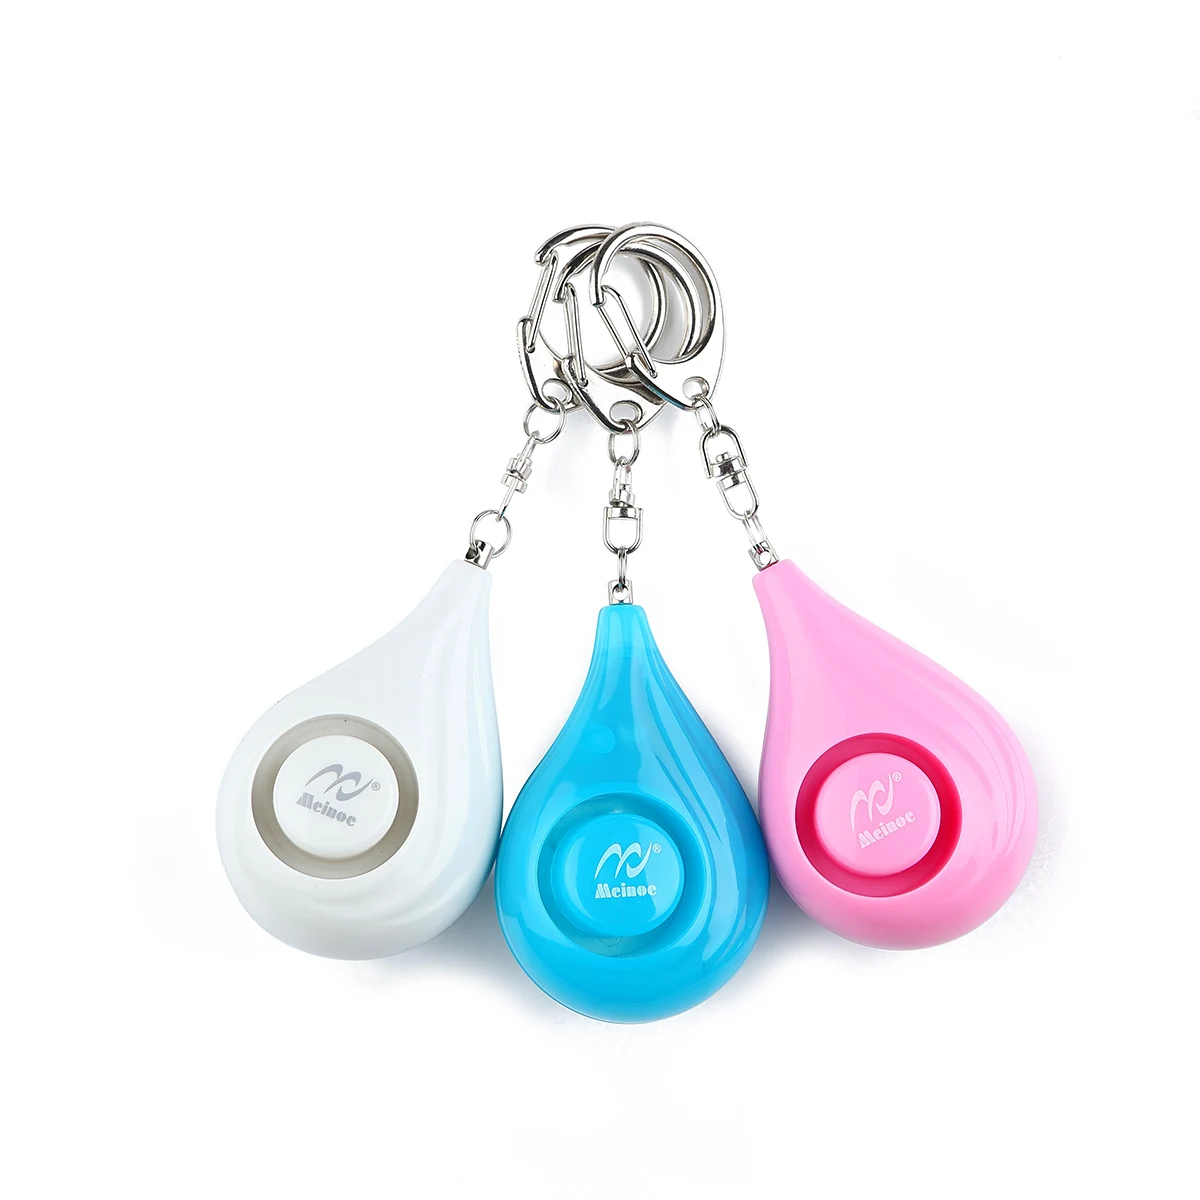 
Meinoe mini portable water drop shaped personal keychain alarm with whistle  (60793065867)